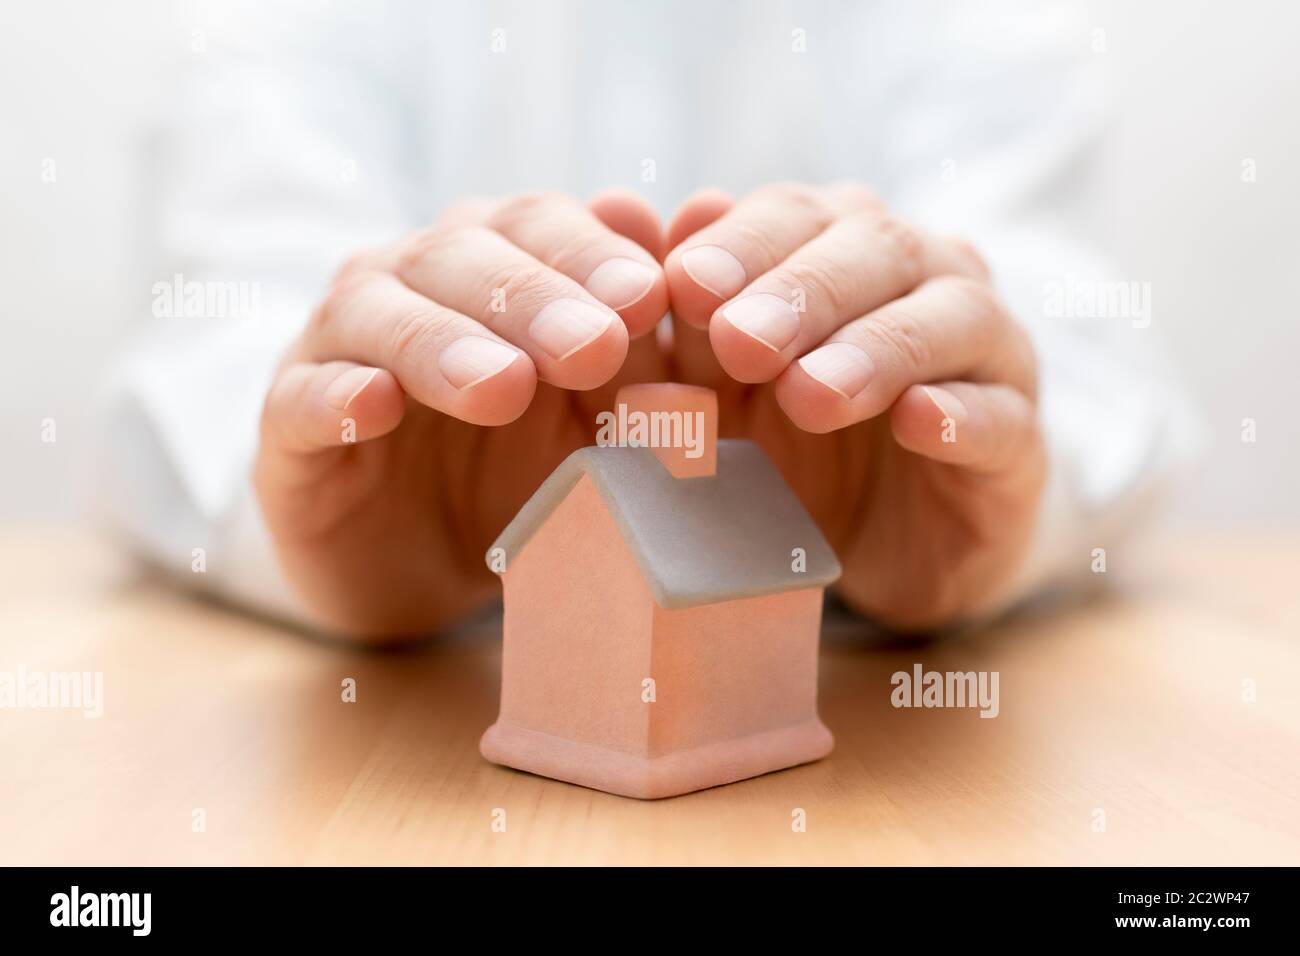 Property insurance. House miniature covered by hands Stock Photo